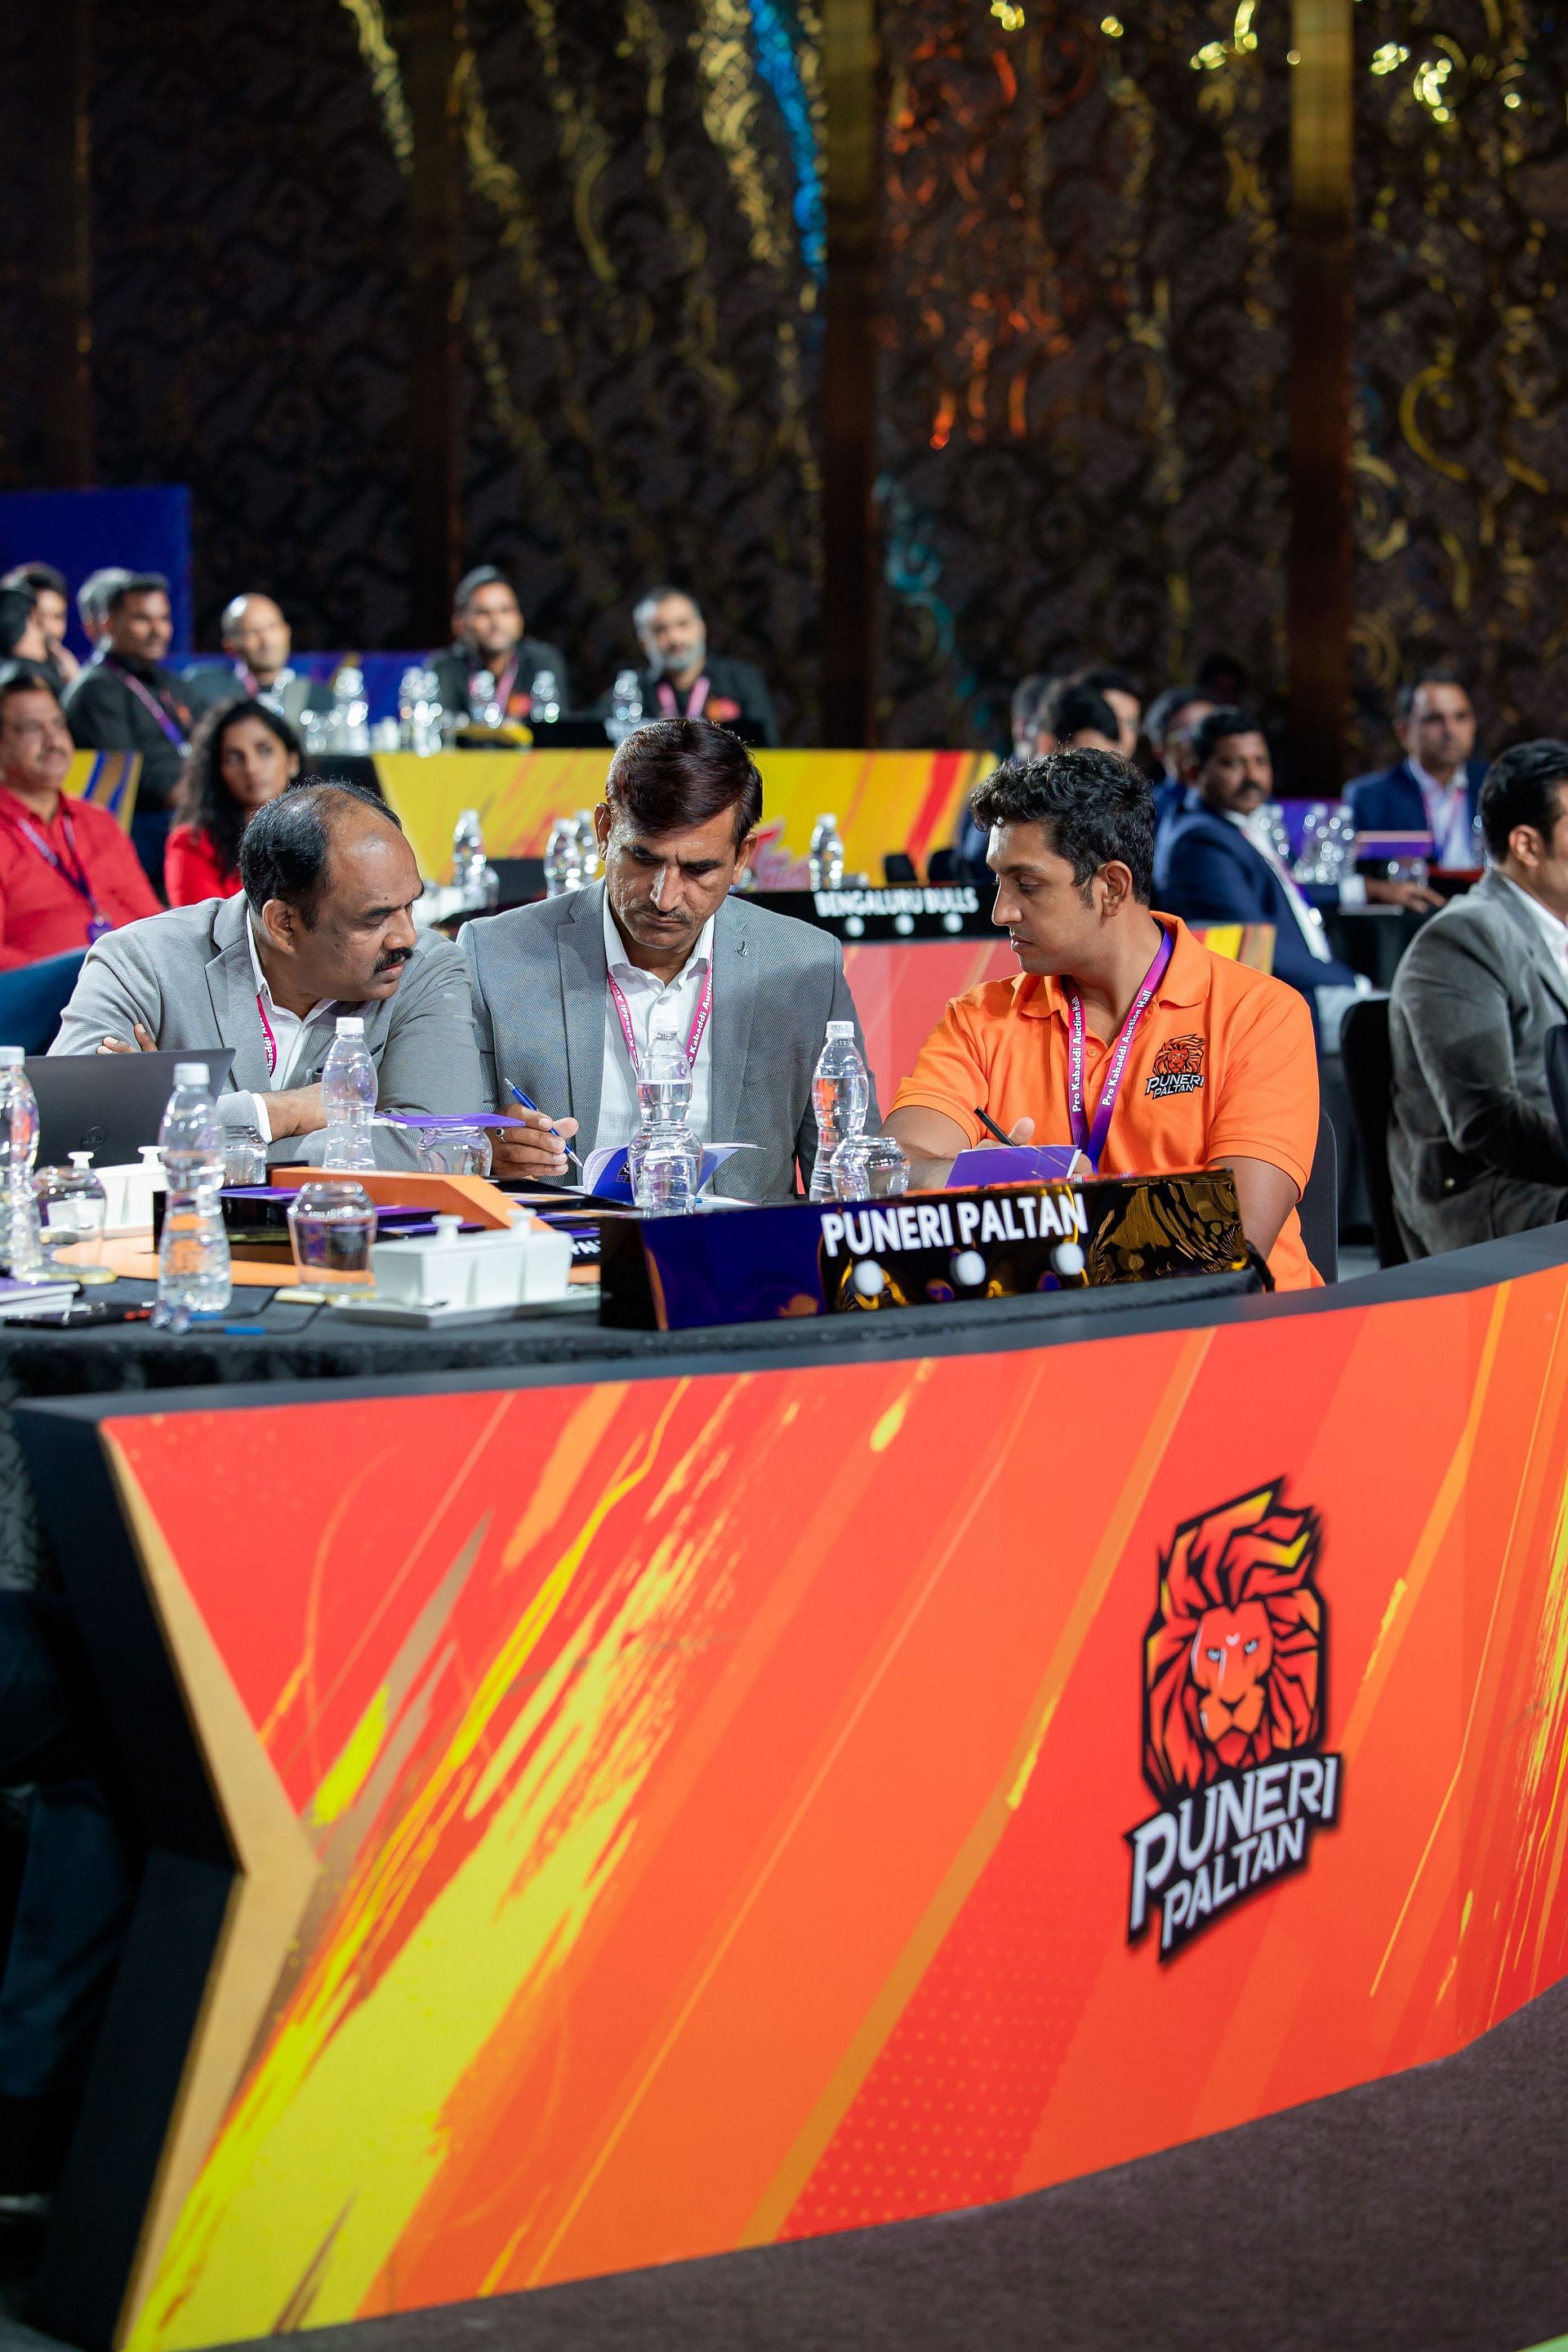 3 Most expensive buys for Puneri Paltan (Image Courtesy: PKL)